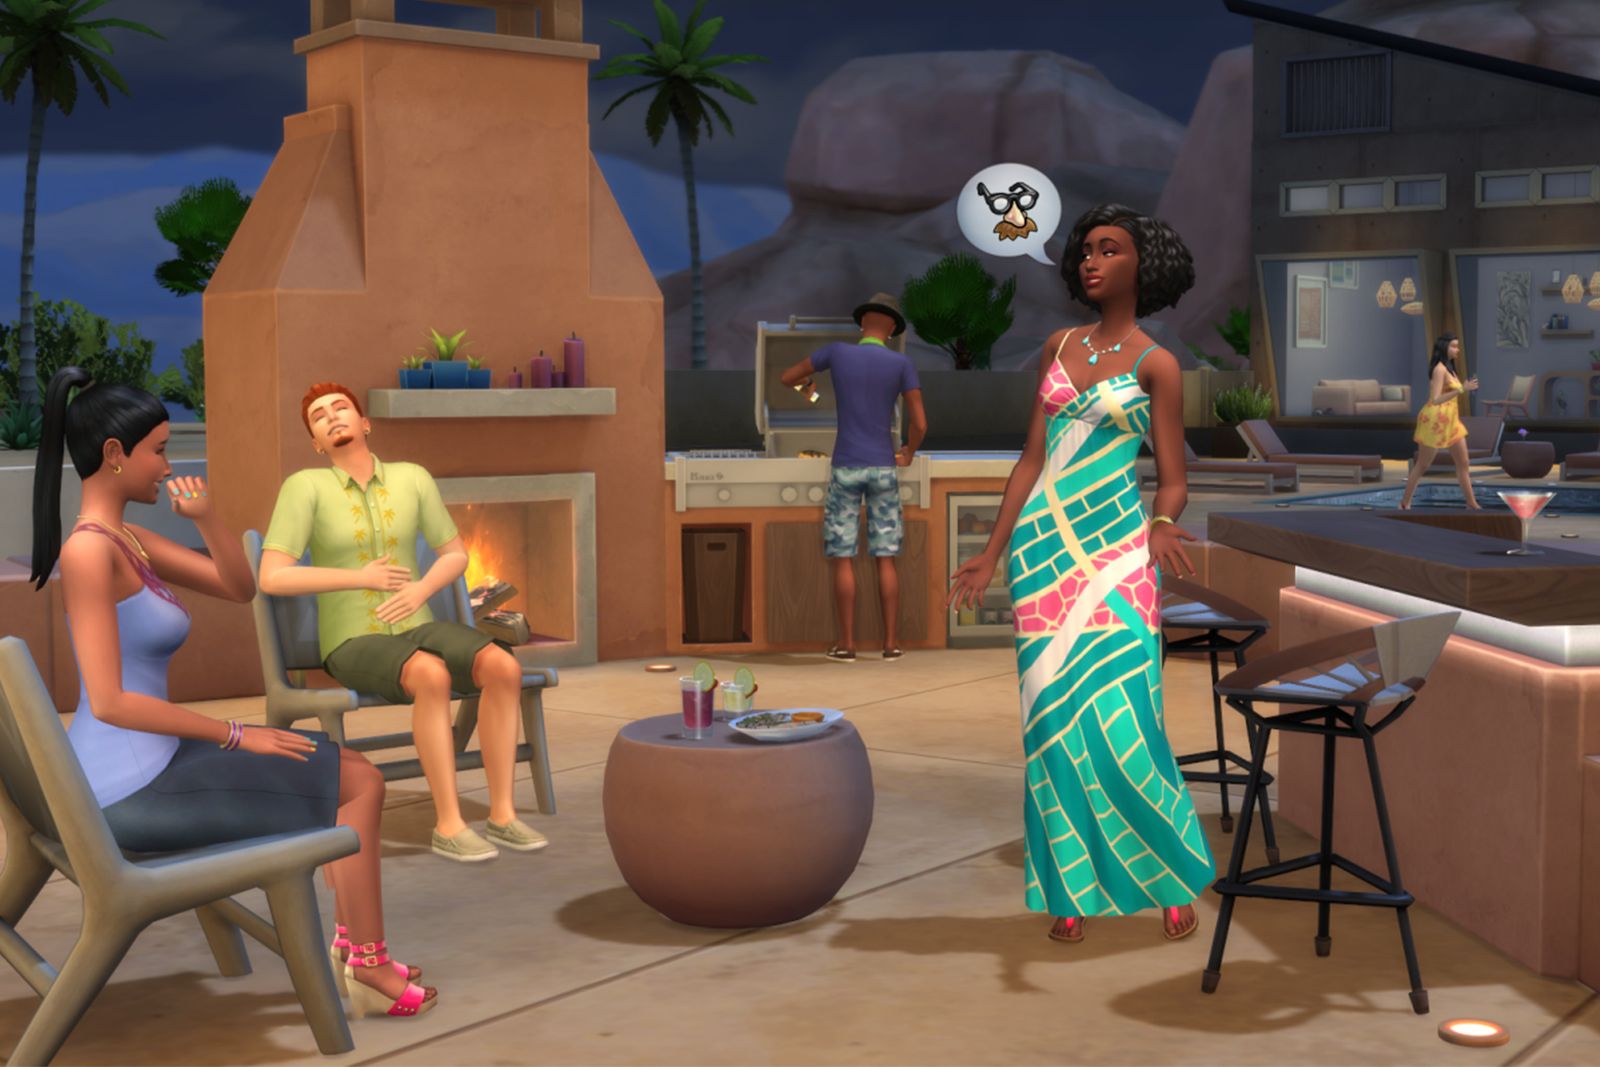 the Sims 4' Is Free on PC and Mac With a Limited-Time Deal